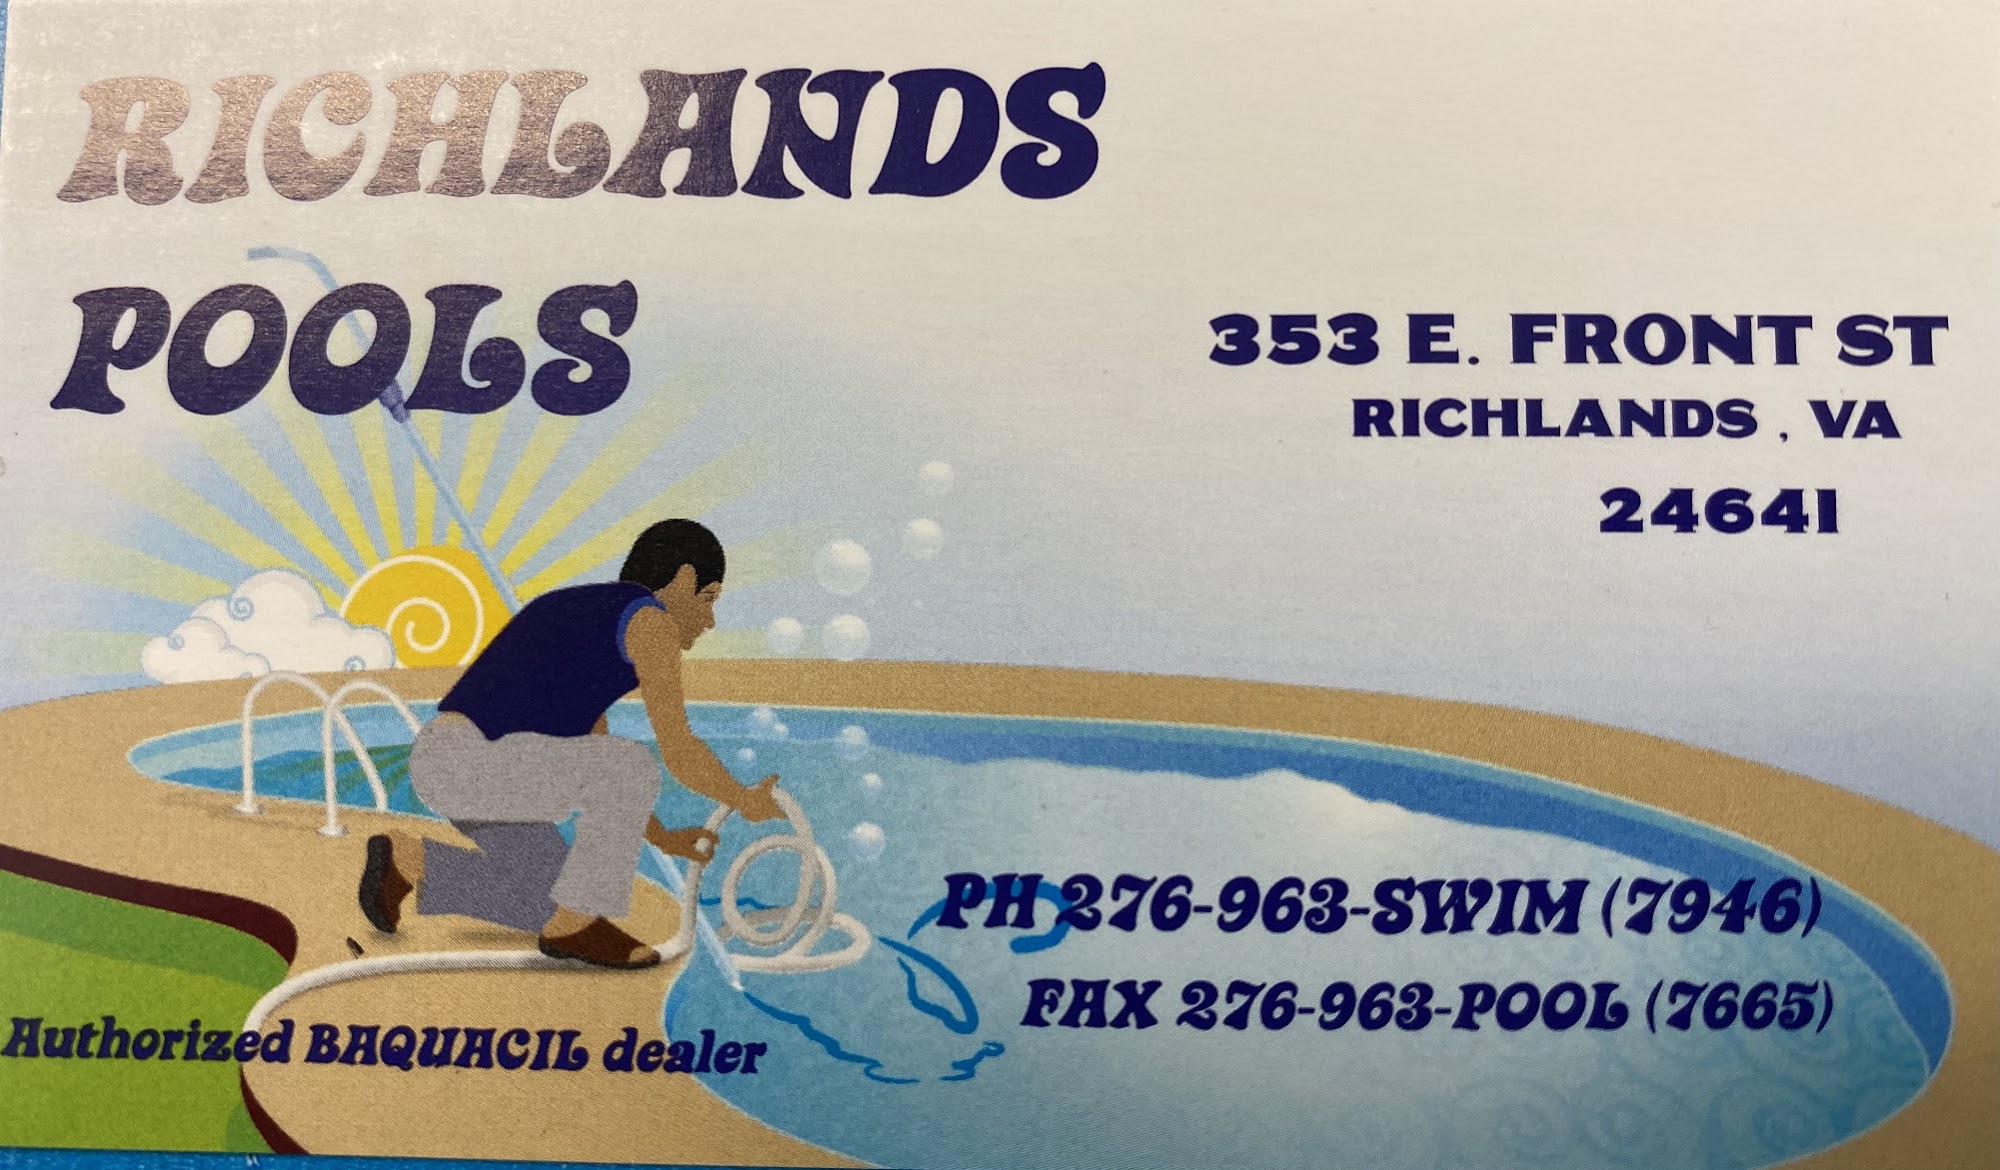 Richlands Pools and Spas 353 Front St, Cedar Bluff Virginia 24609